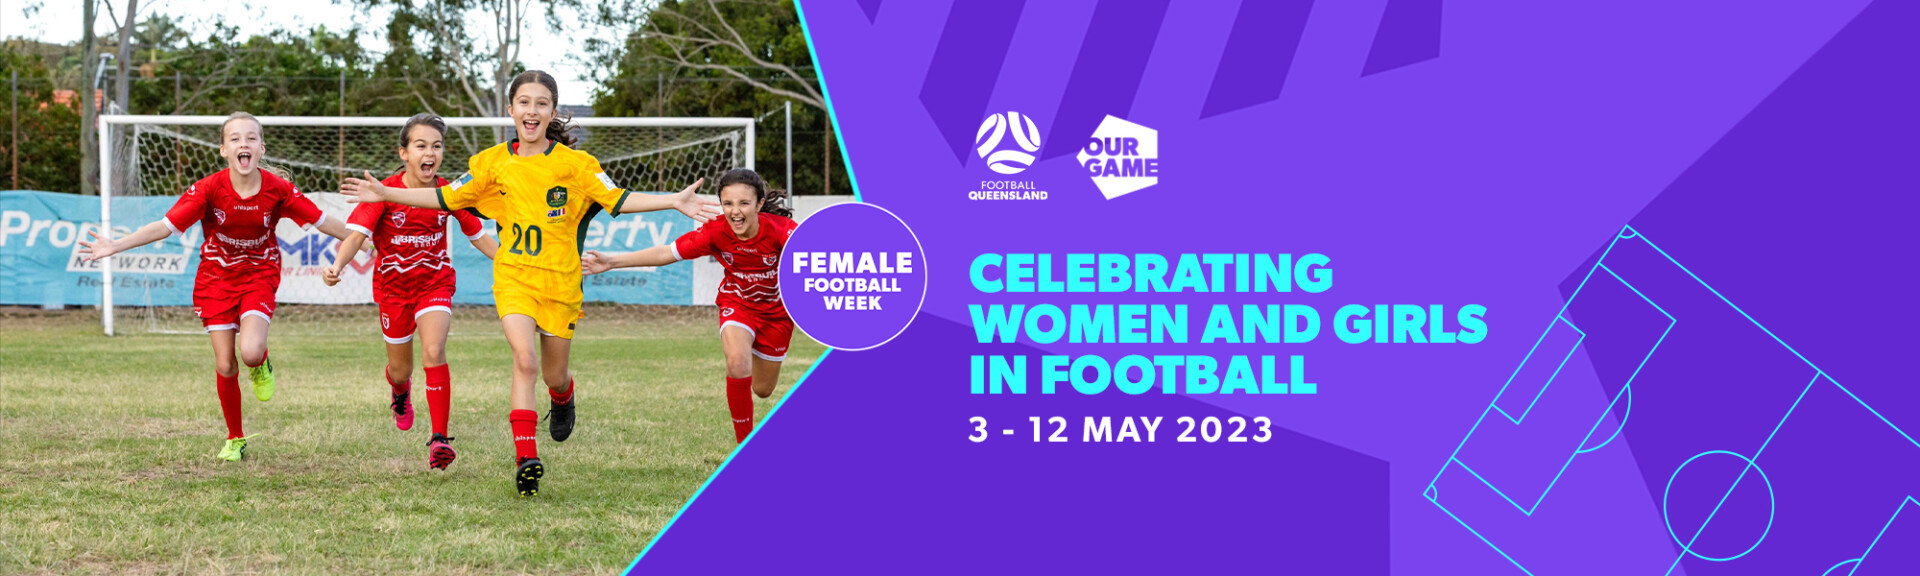 2402 - Campaigns - Female Football Week - Launch - Event Banner